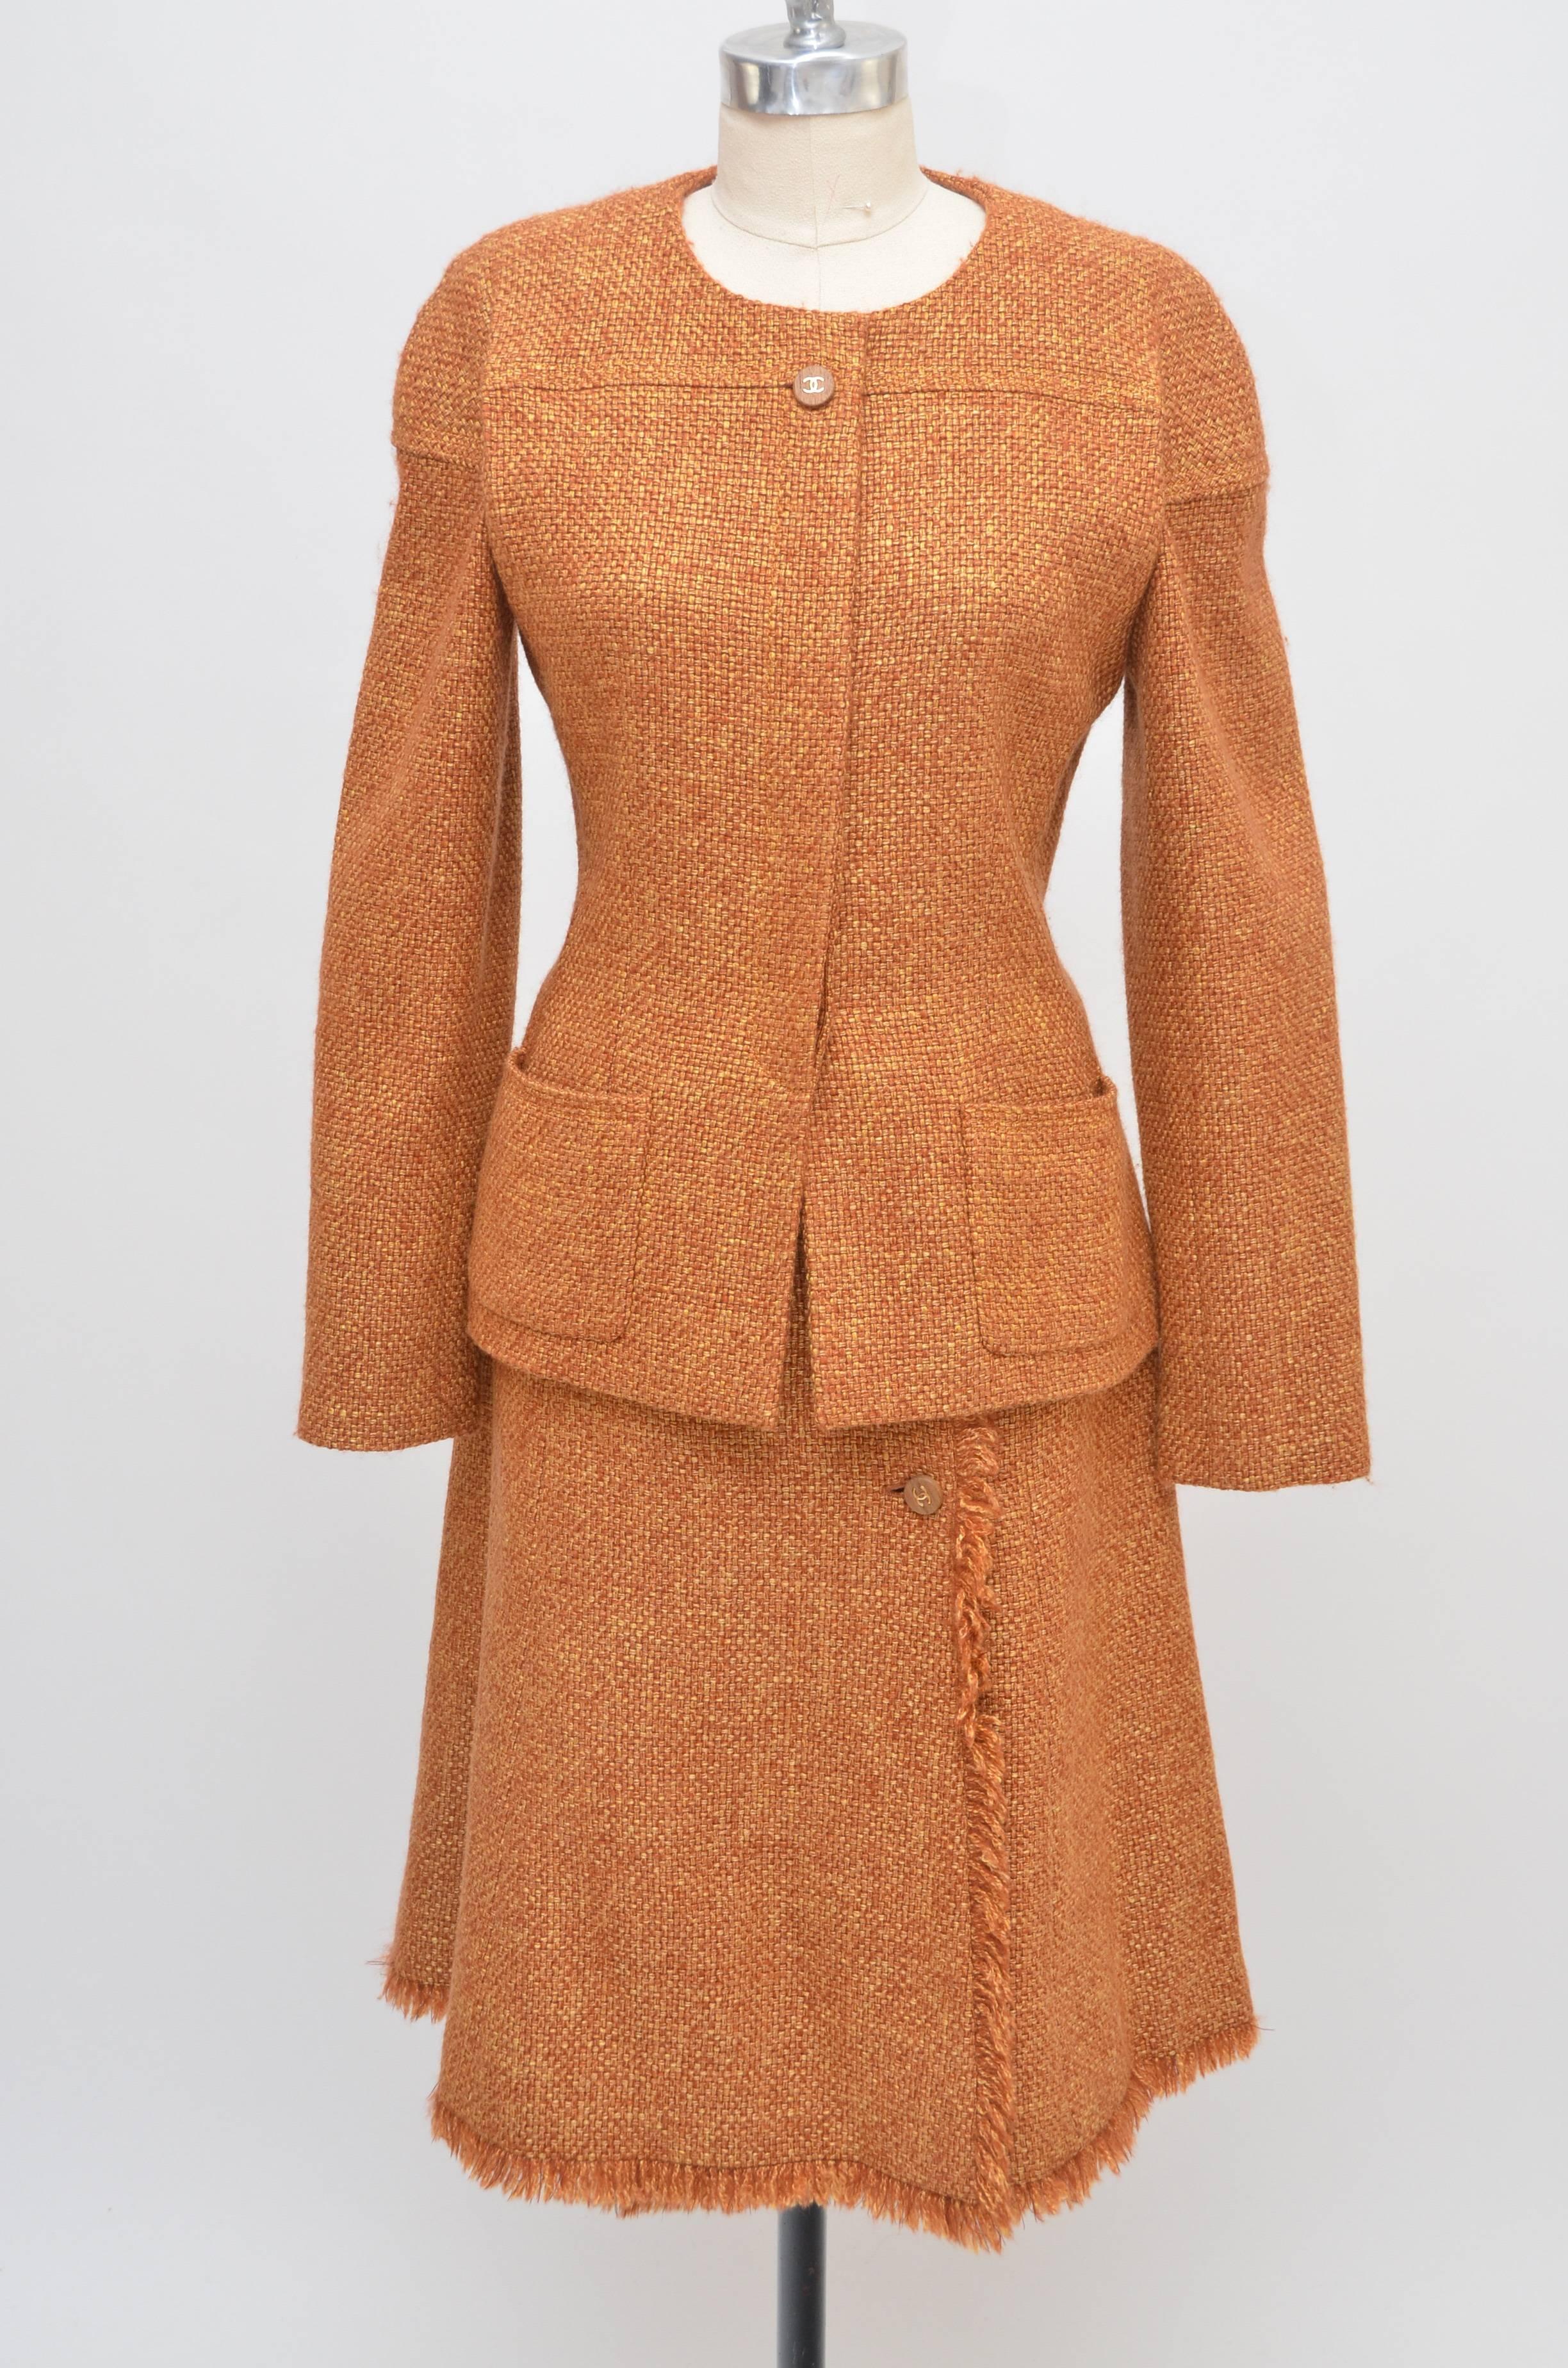 Brown Chanel 3 Piece Tweed Suit, Collection 2001 